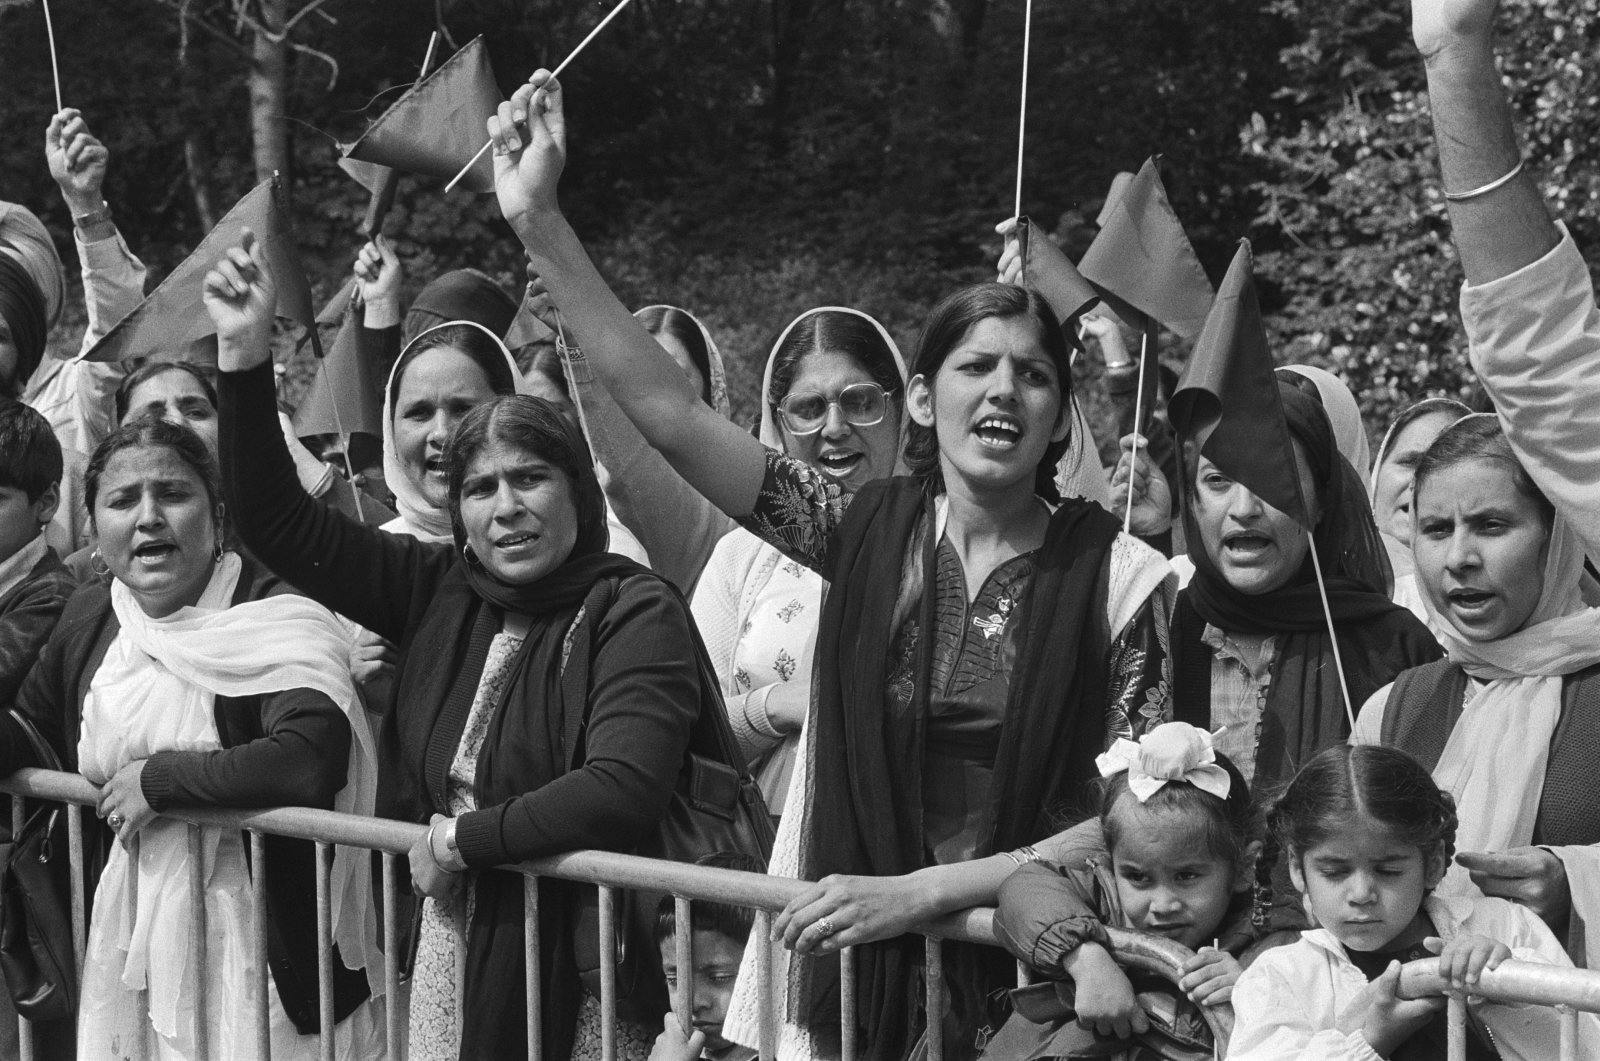 Sikh women protesting on June 12, 1984 at the Hague (Fotograaf : Croes, Rob C. / Anefo)